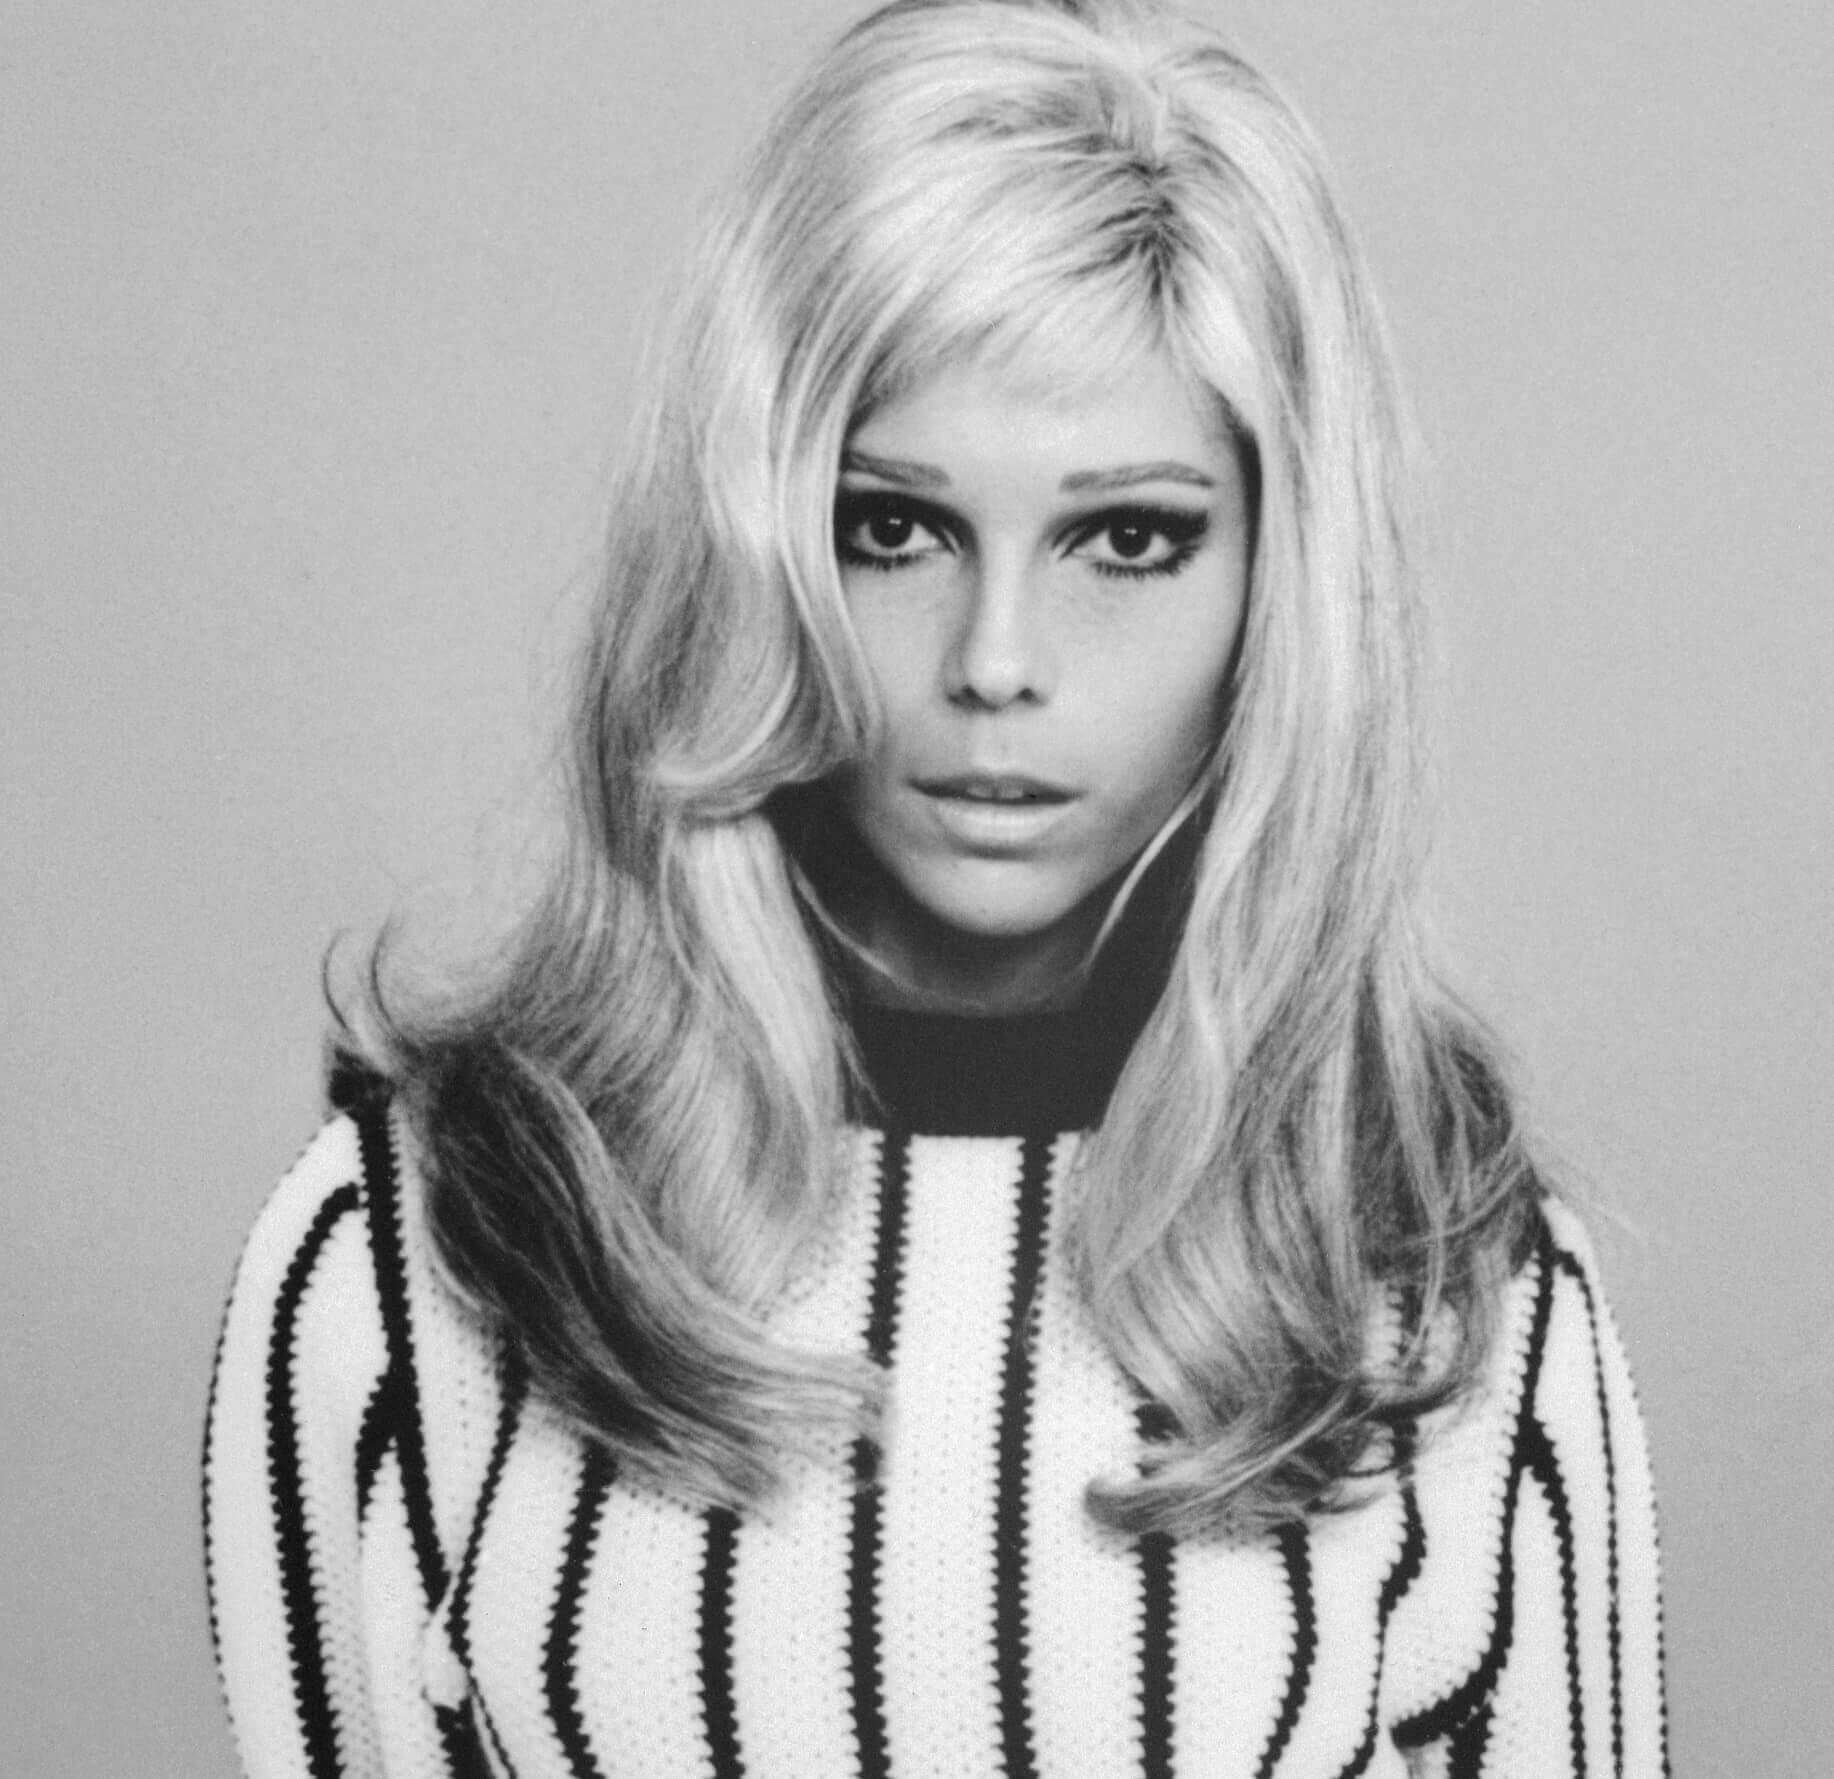 "These Boots Are Made for Walkin'" singer Nancy Sinatra in black-and-white